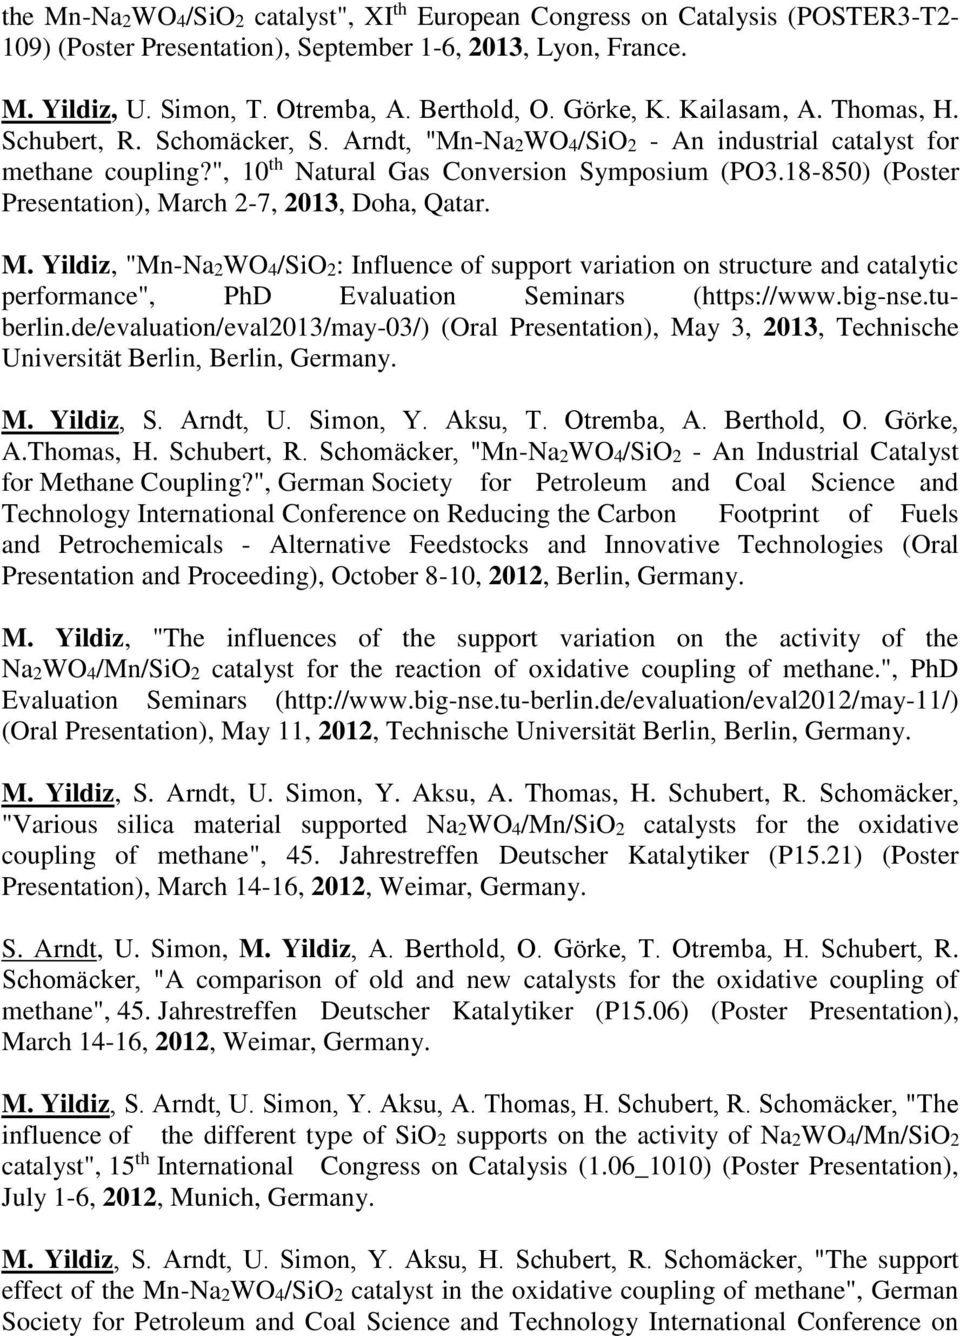 18-850) (Poster Presentation), March 2-7, 2013, Doha, Qatar. M. Yildiz, "Mn-Na2WO4/SiO2: Influence of support variation on structure and catalytic performance", PhD Evaluation Seminars (https://www.